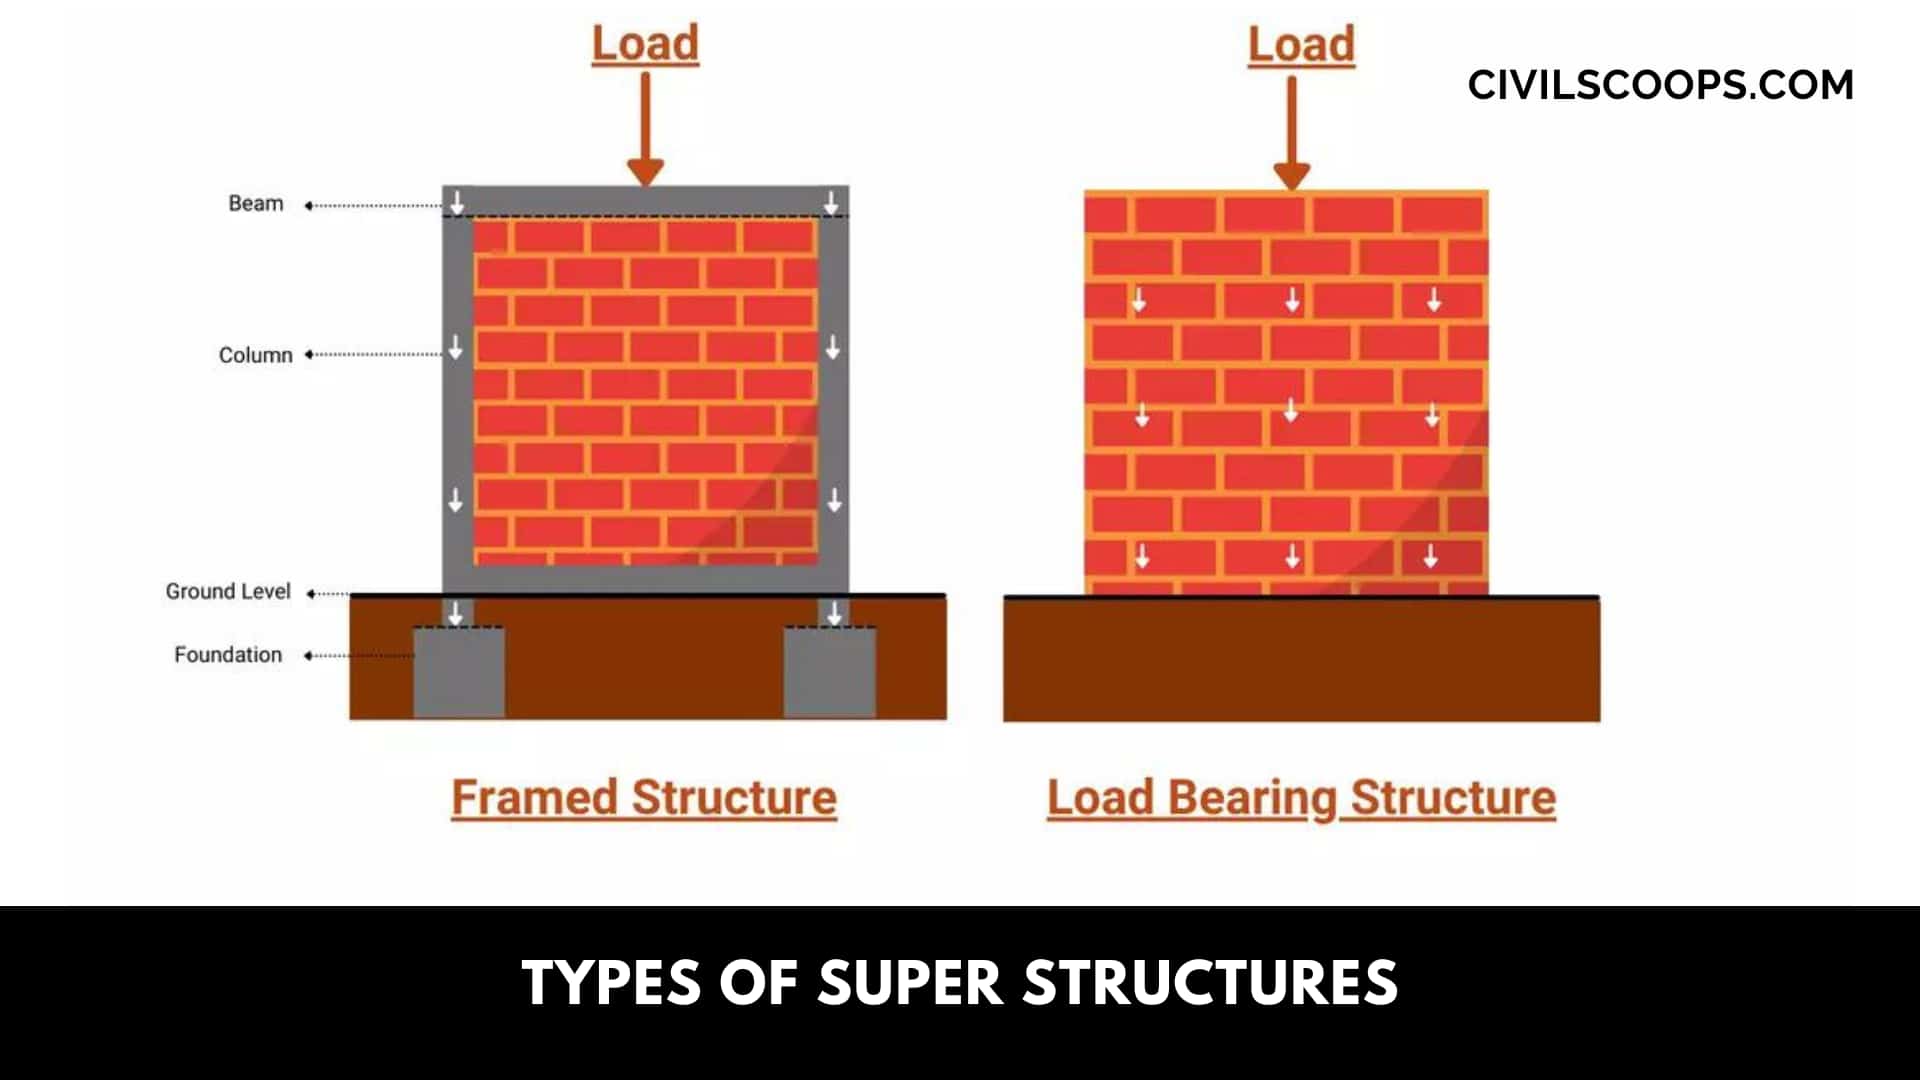 Types of Super Structures